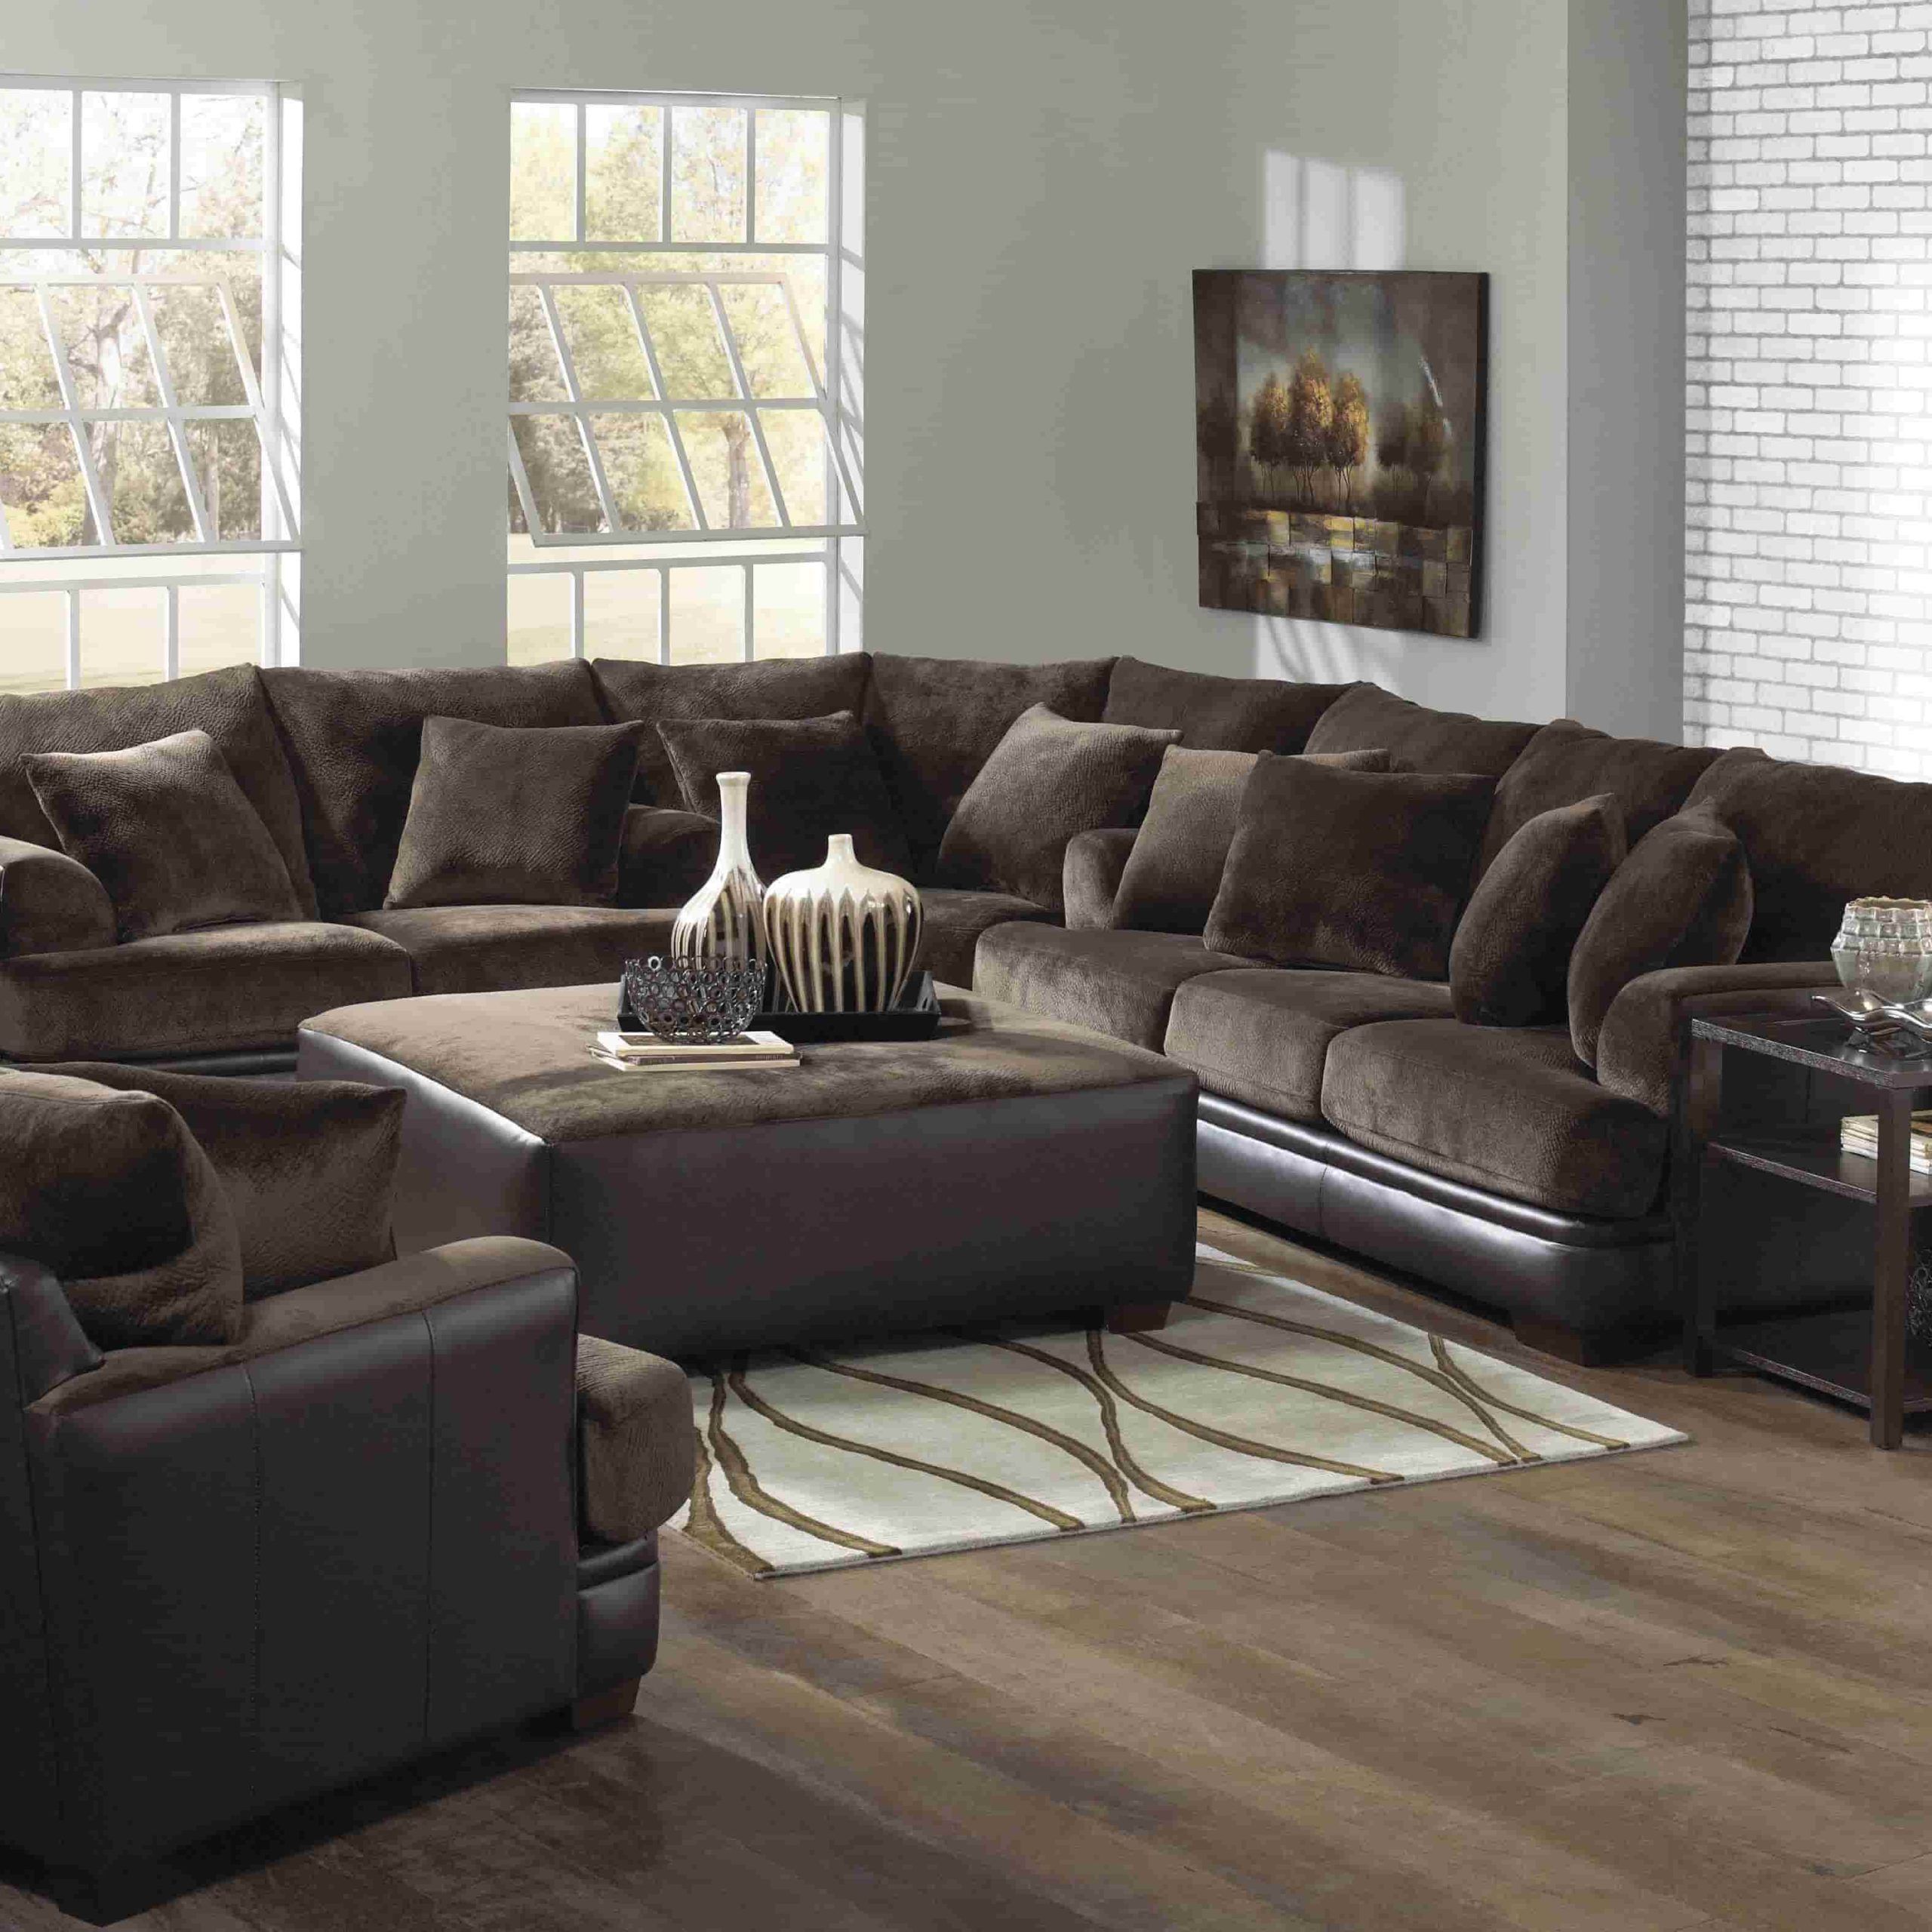 Newest Sofas In Chocolate Brown With Living Room Decor With Dark Brown Couch – Inspiring Ideas (View 15 of 15)